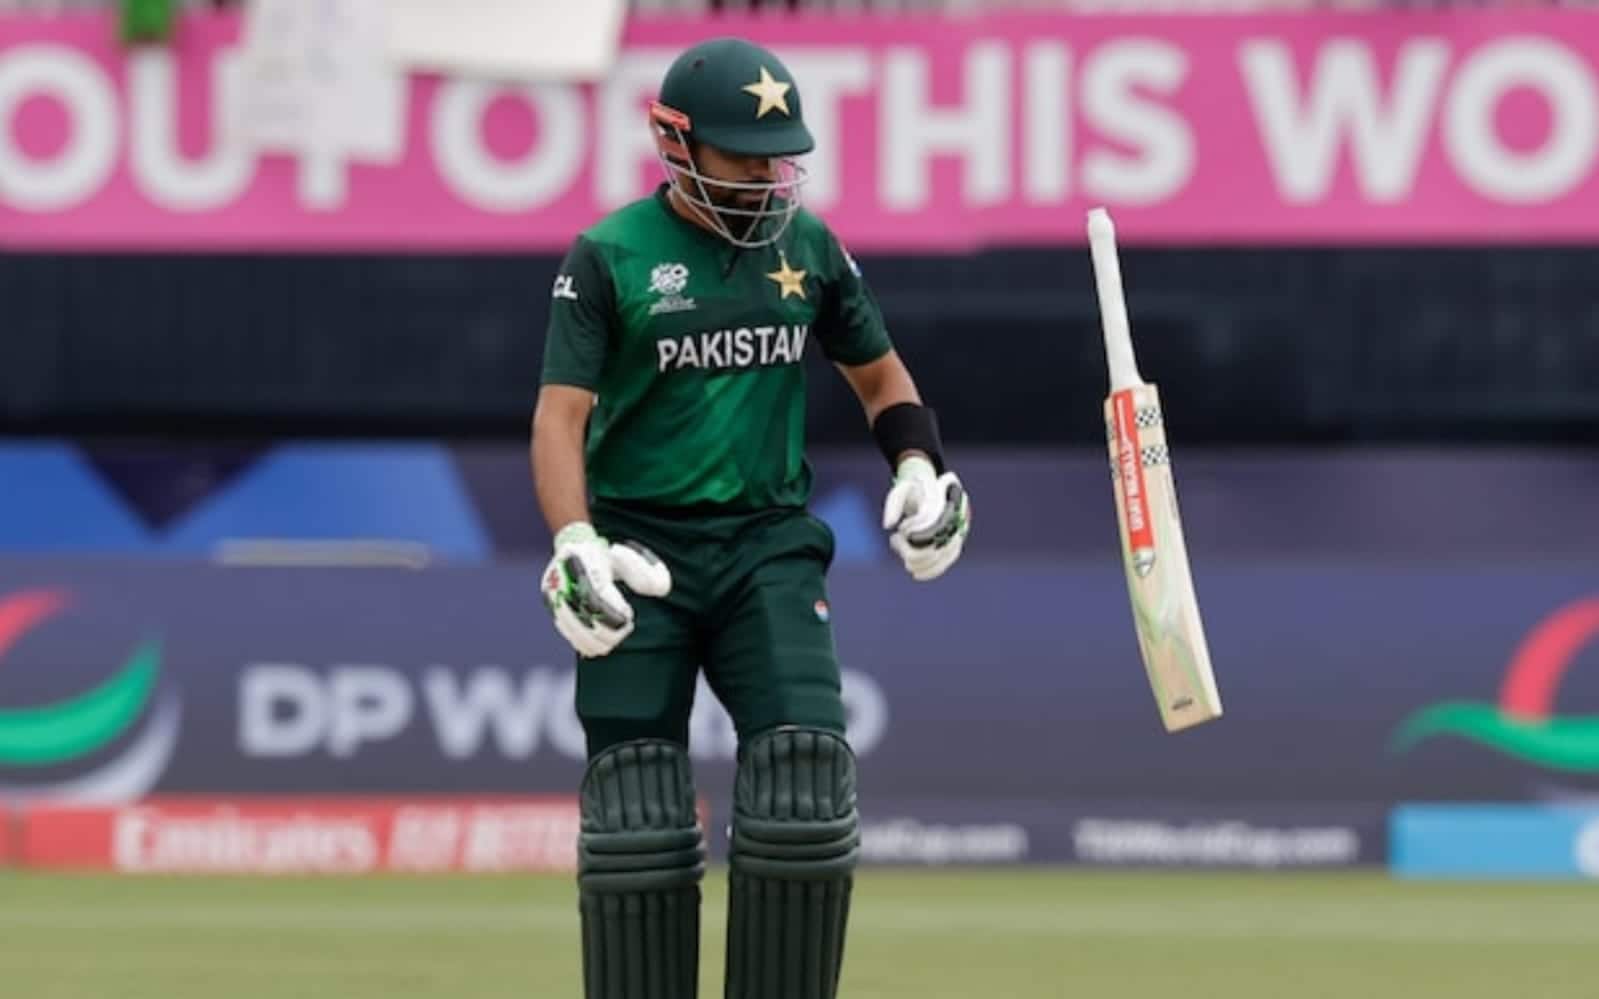 Shoaib Malik asks Babar Azam to resign after Pakistan crashes out of the WC [X]